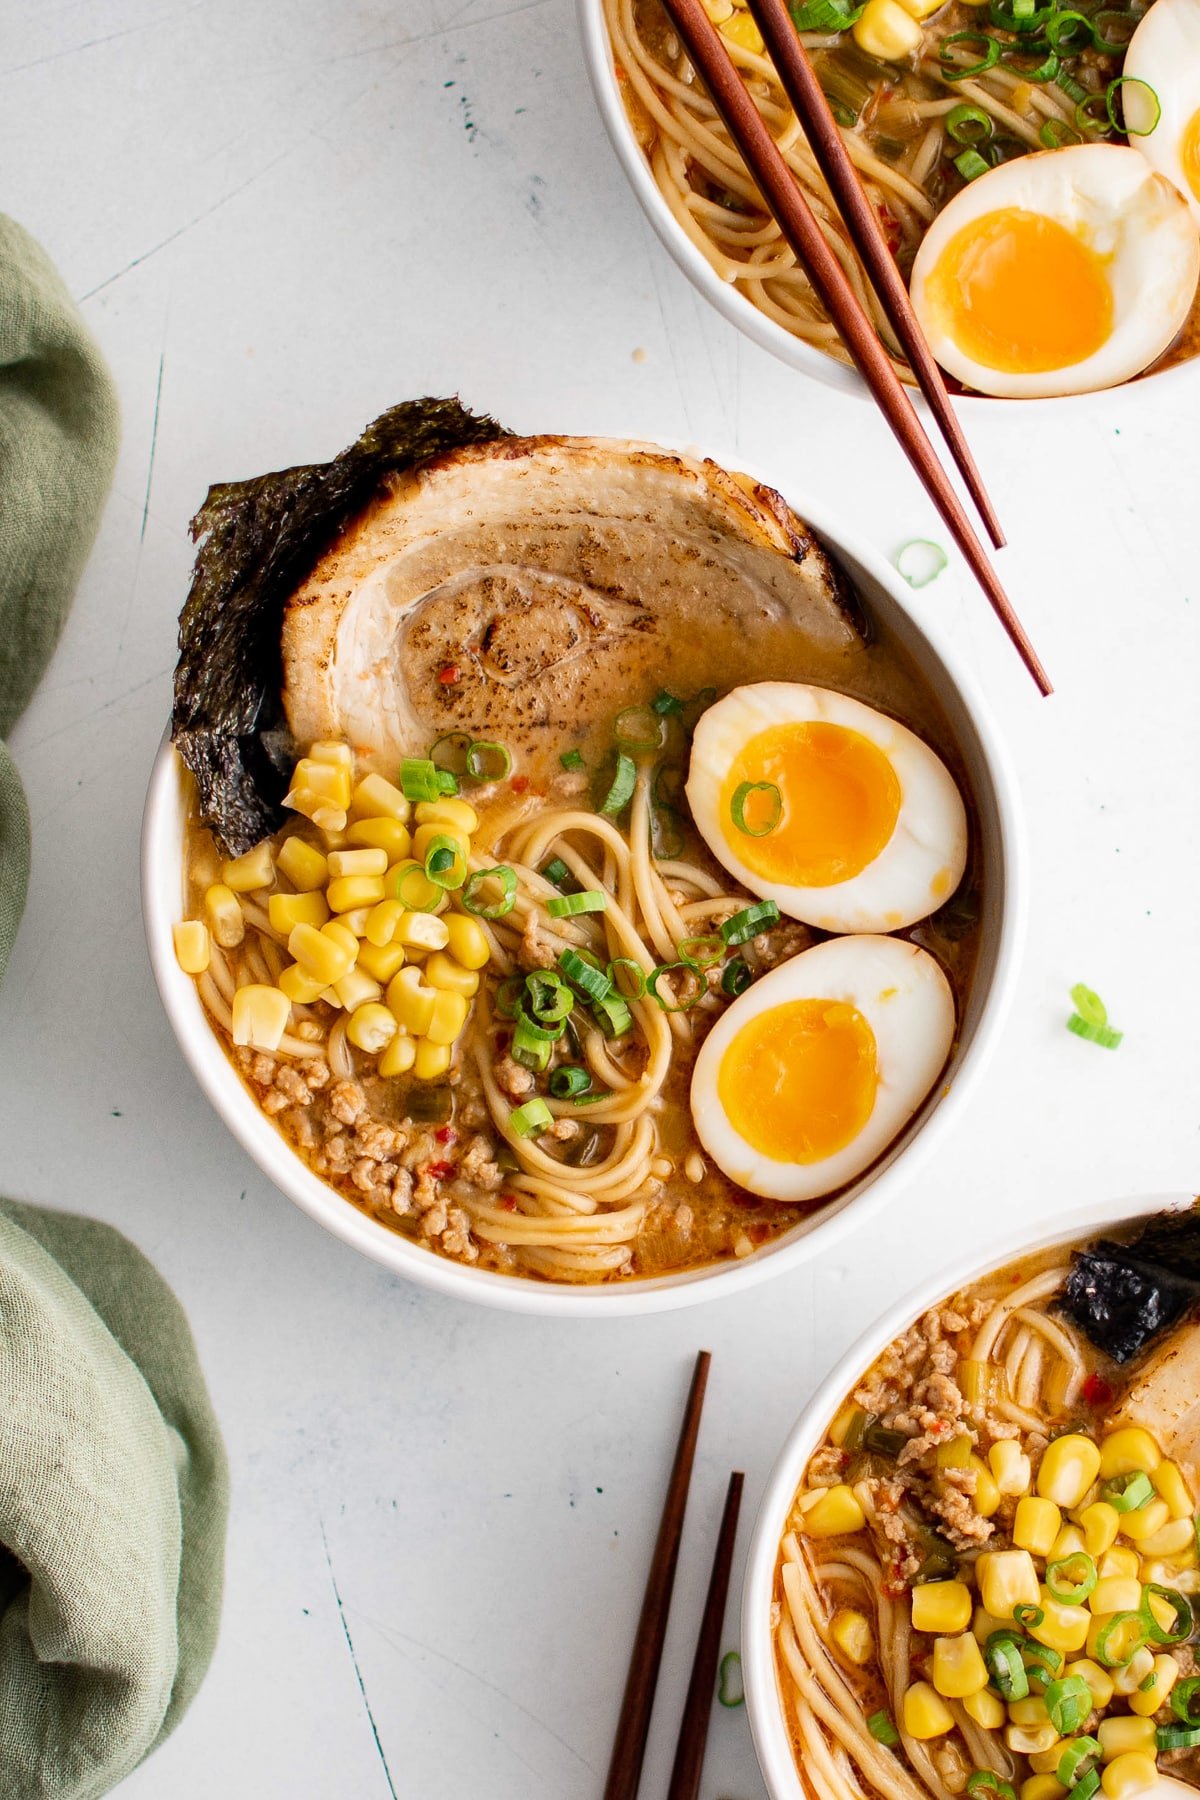 Three bowls filled with miso ramen broth and ramen noodles topped with chashu pork, seaweed, ramen egg, corn, and green onions.